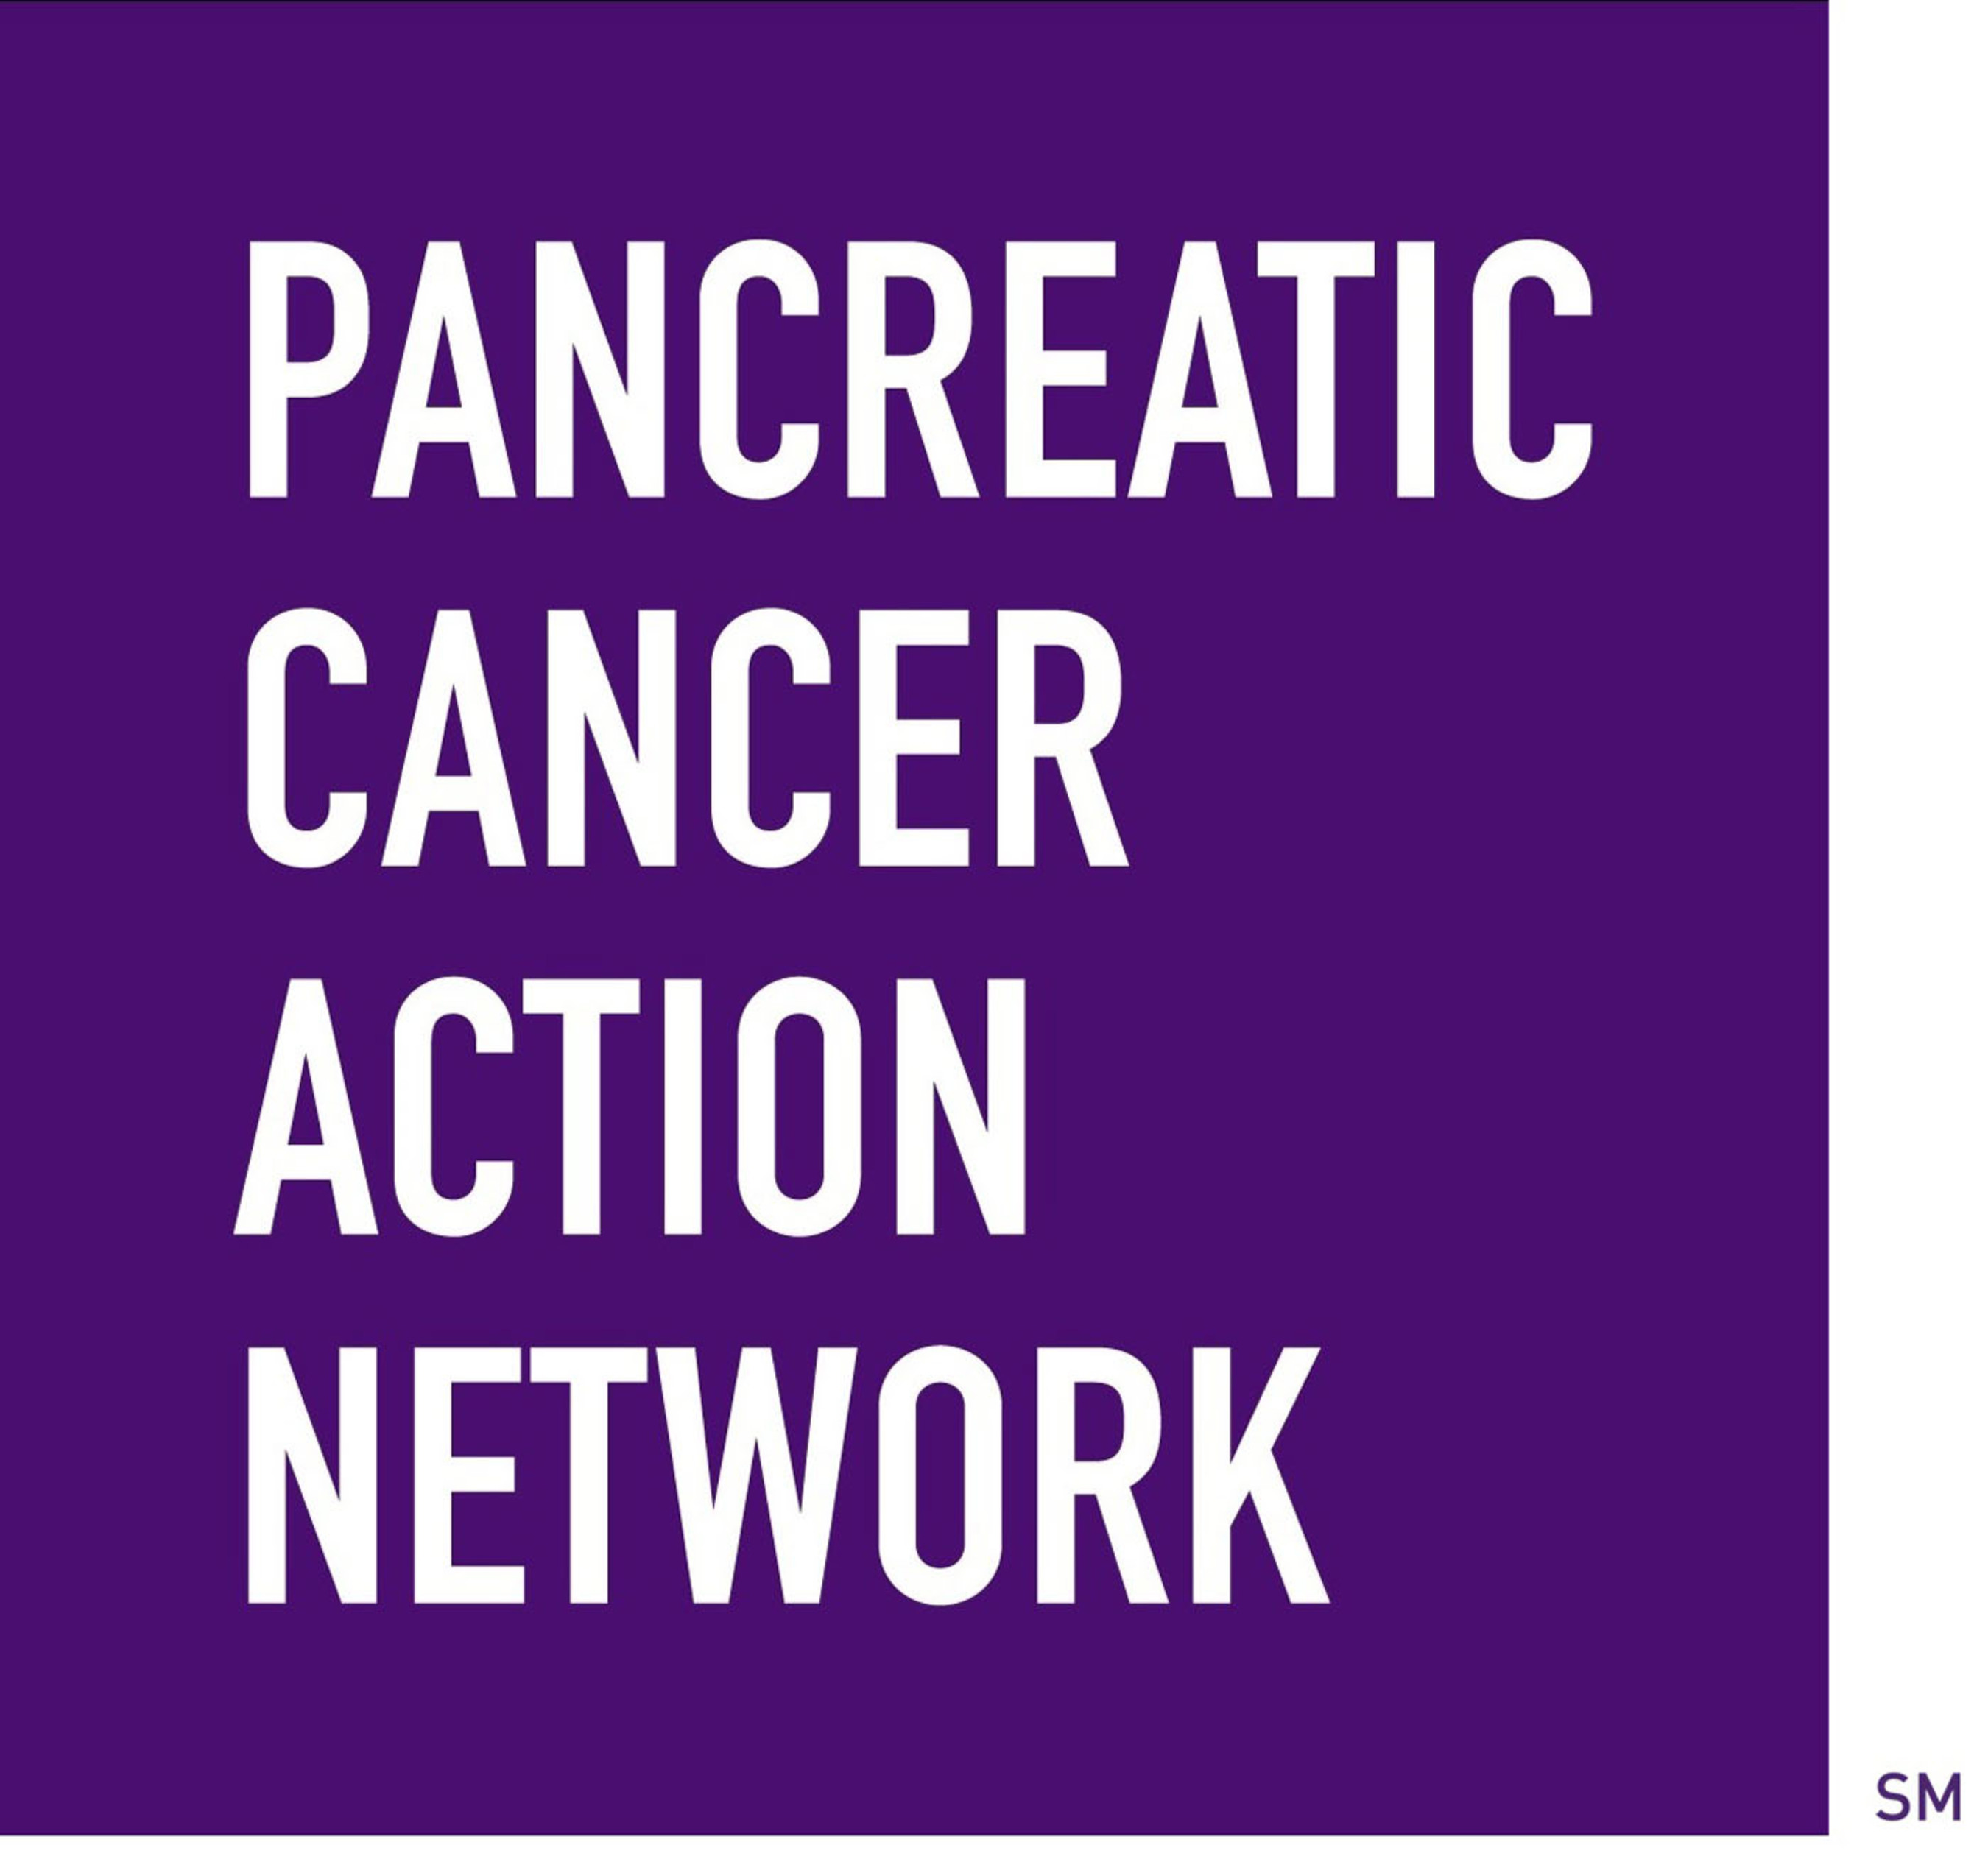 Pancreatic Cancer Action Network logo.